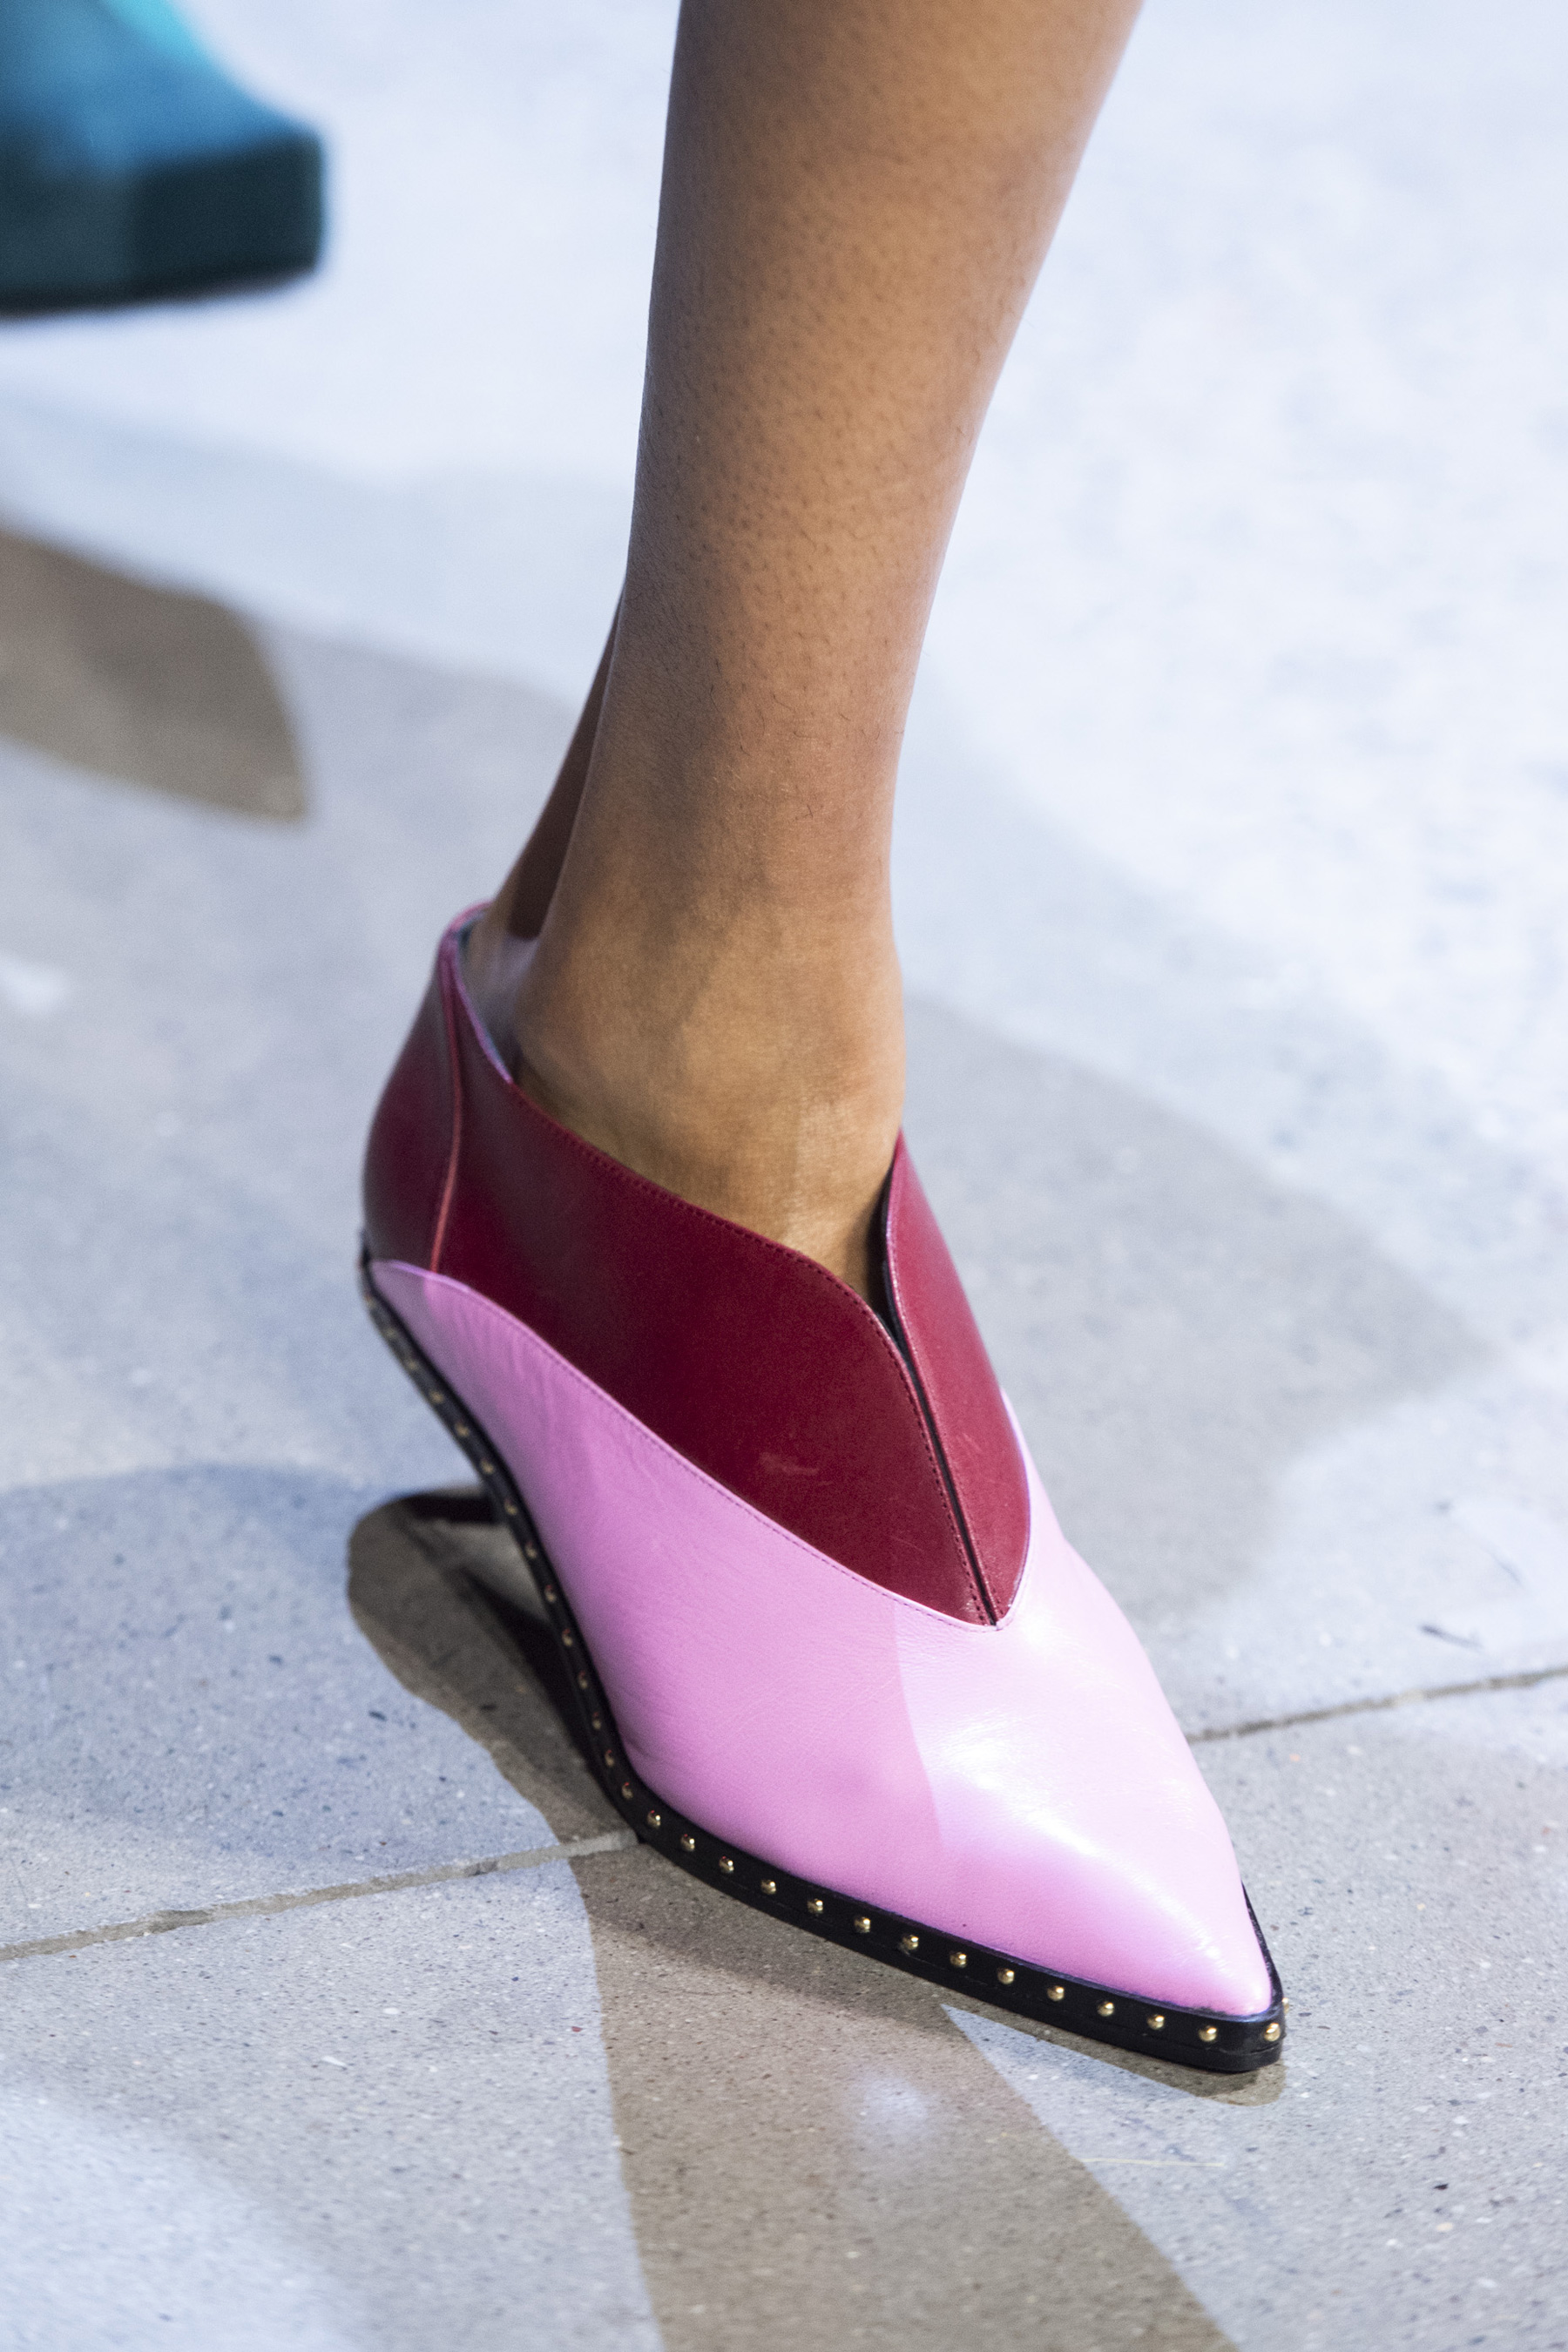 Best Shoes at New York Fashion Week Women's Fall 2019 | The Impression